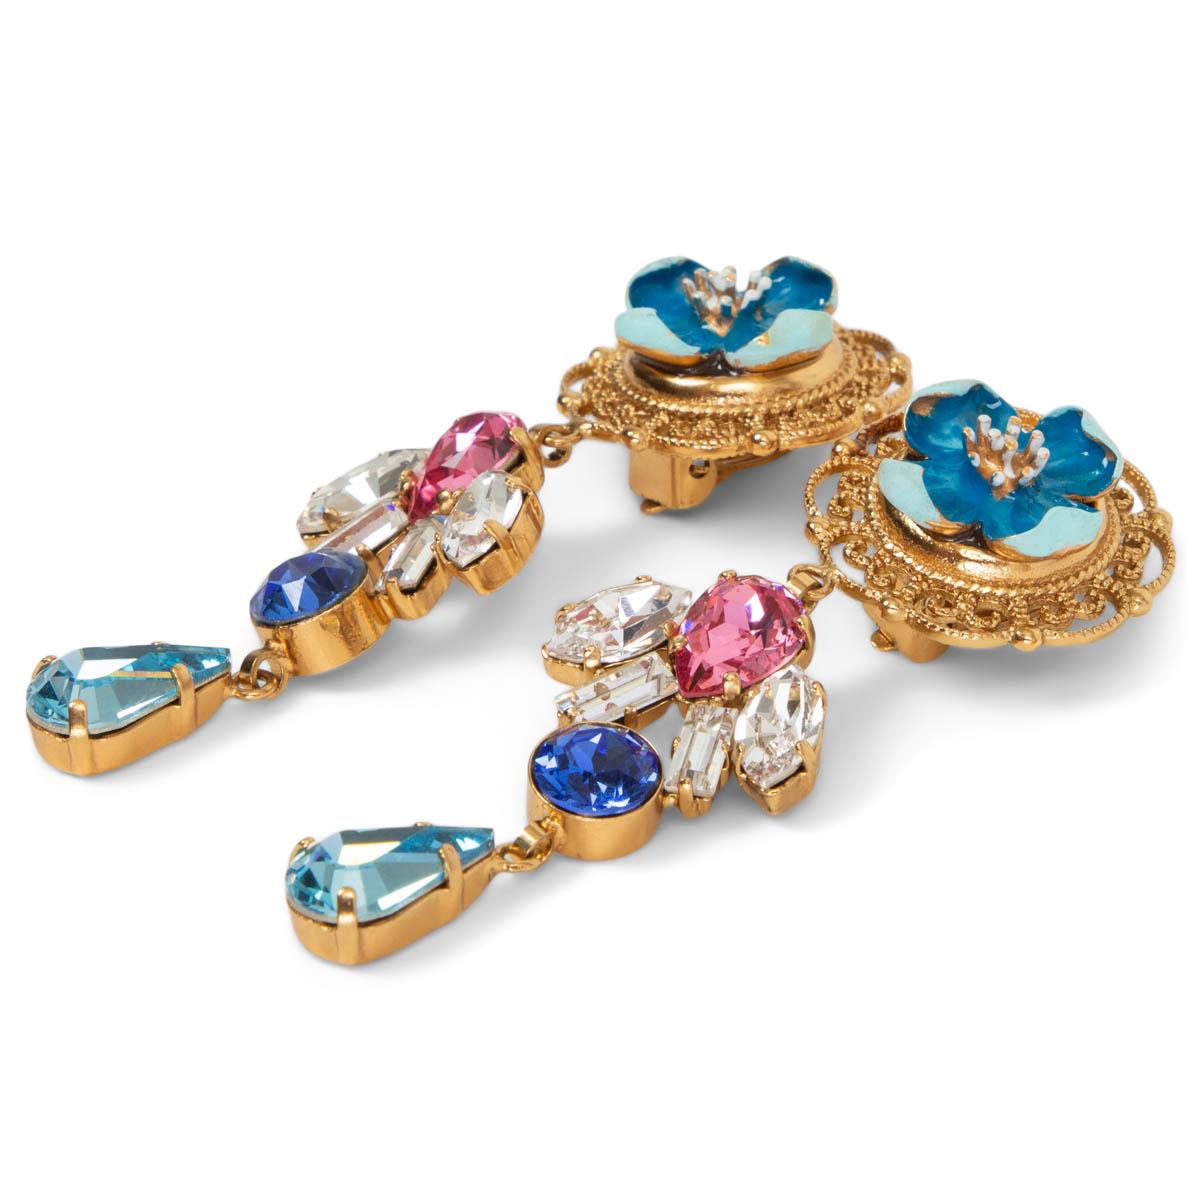 100% authentic Dolce & Gabbana Flower & Crystal drop clip-on earrings with light blue, blue, pink and clear rhinestones and a blue resin flower featuring gold-tone brass filigree. Have been worn and are in excellent condition.